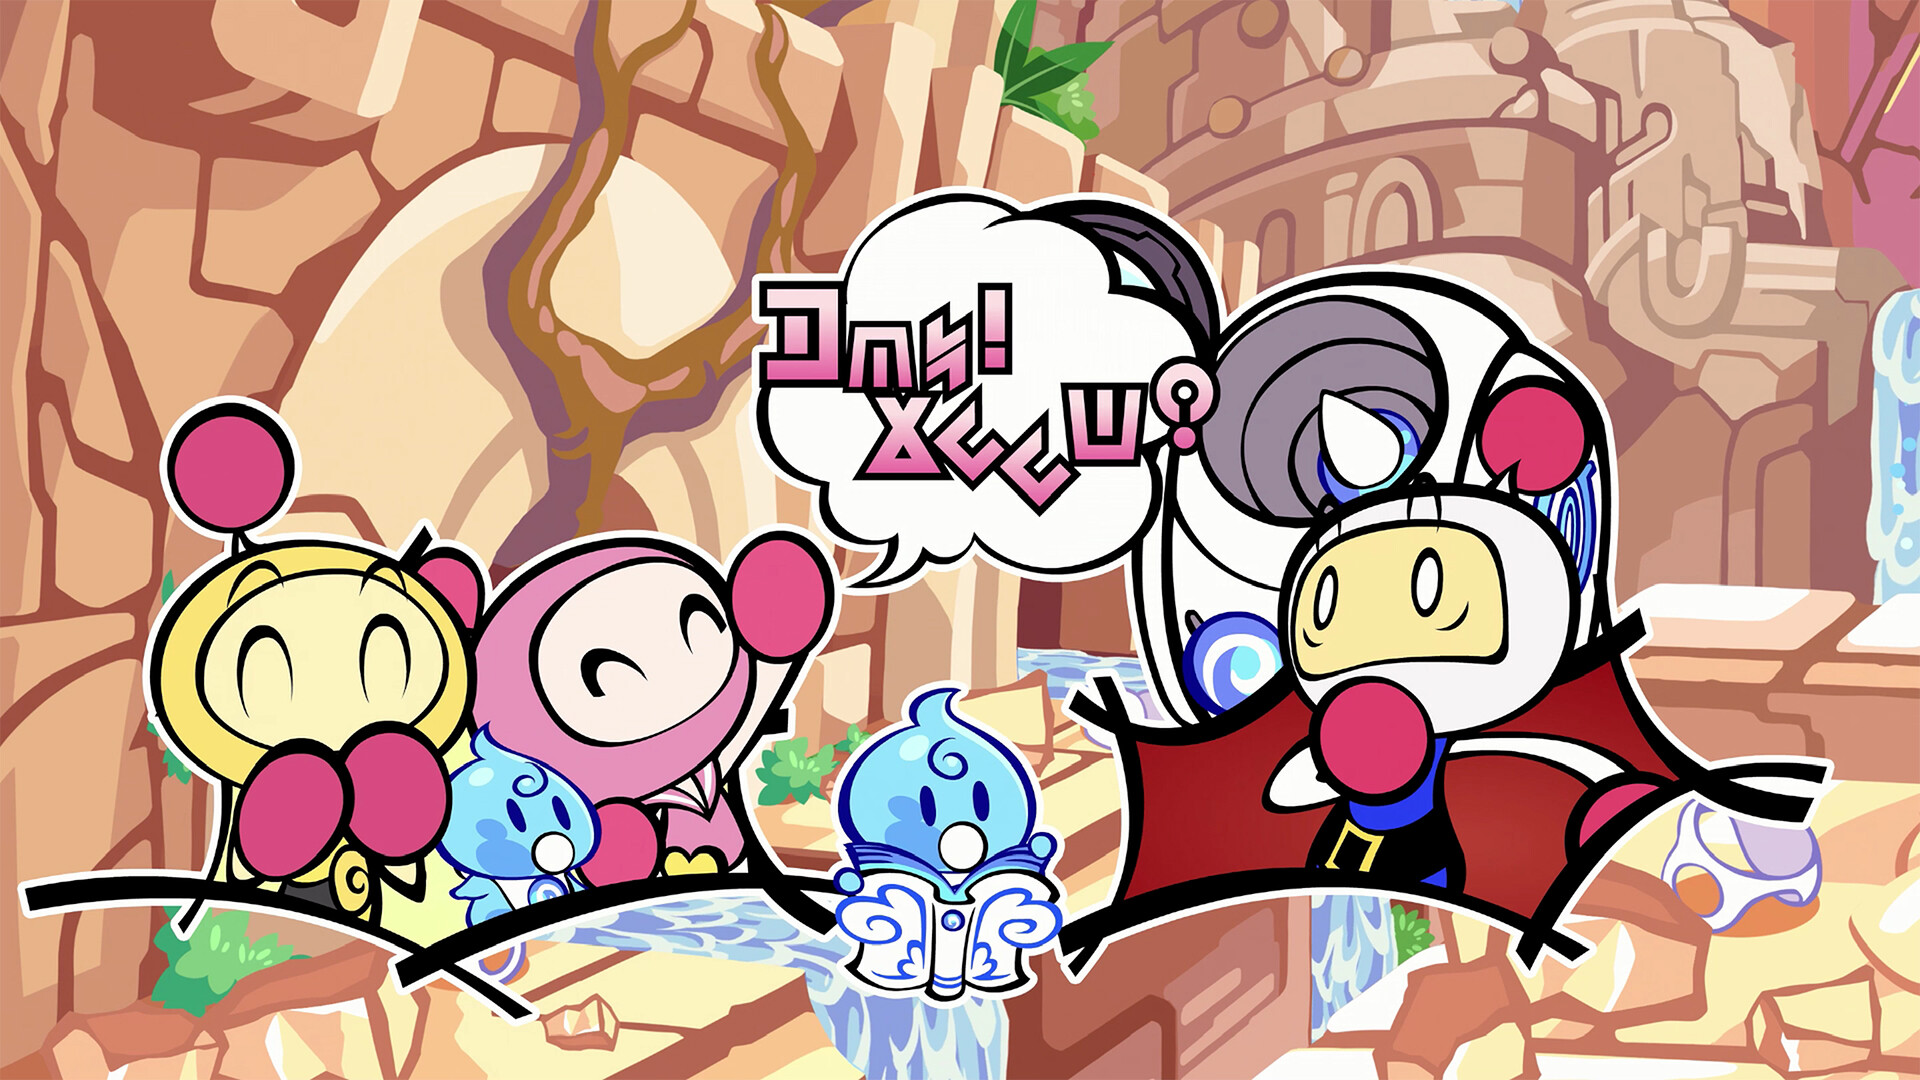 Dominate in Super Bomberman R Online with 6 Battle Royale tips